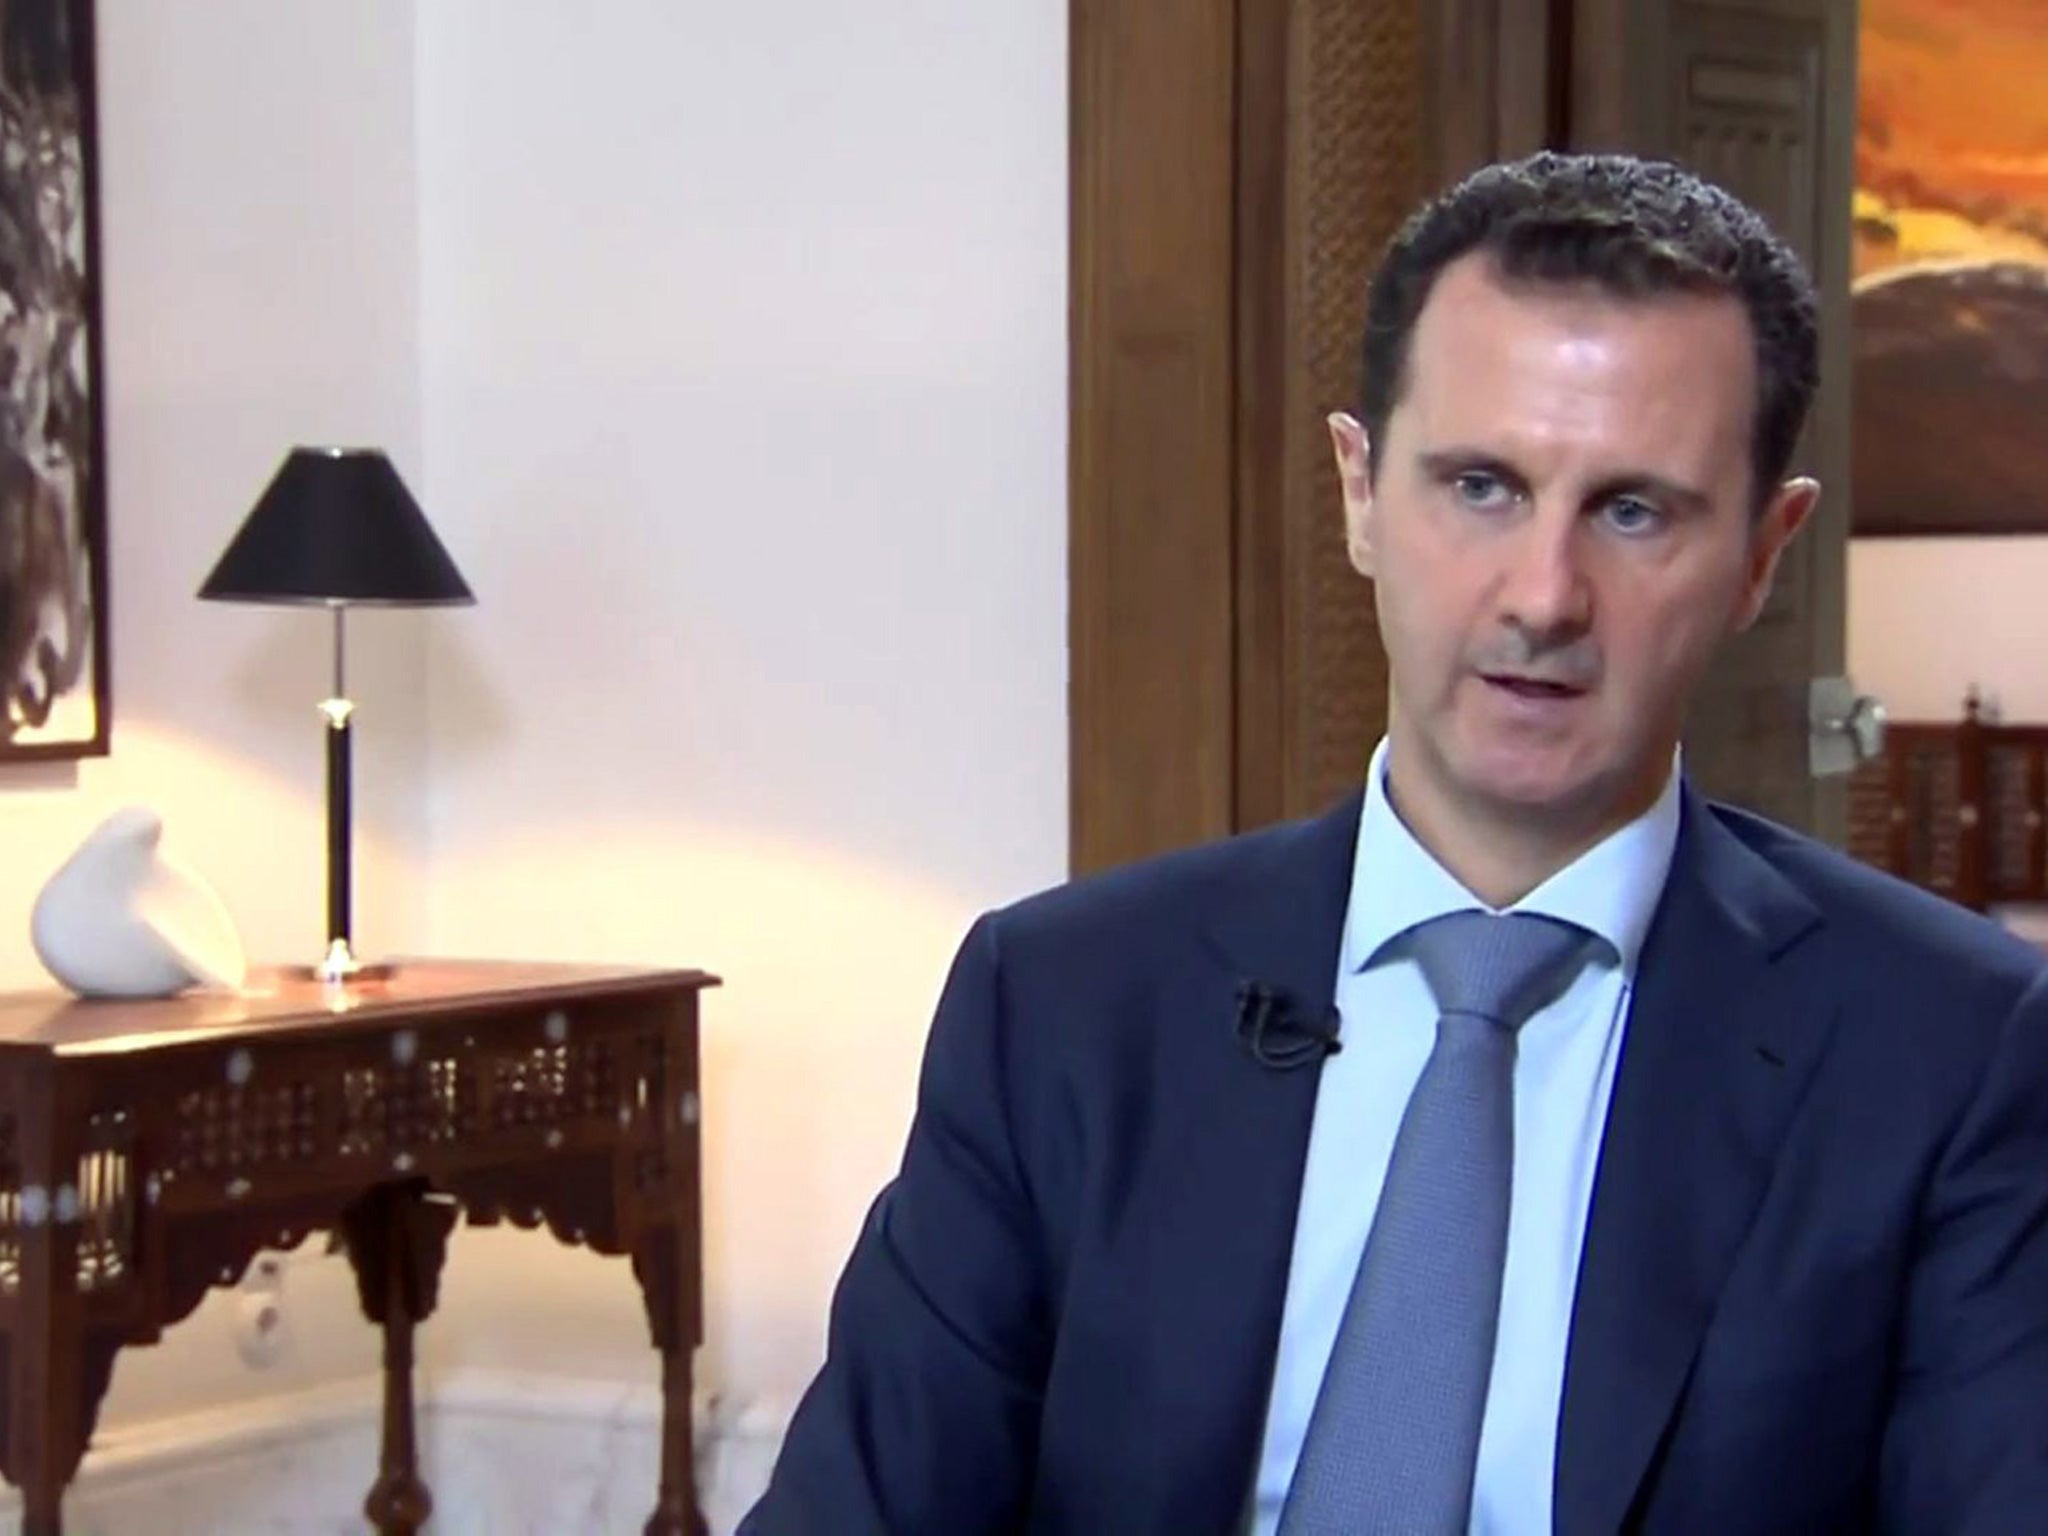 Russia has entered the war in favour of Syrian President Bashar al-Assad